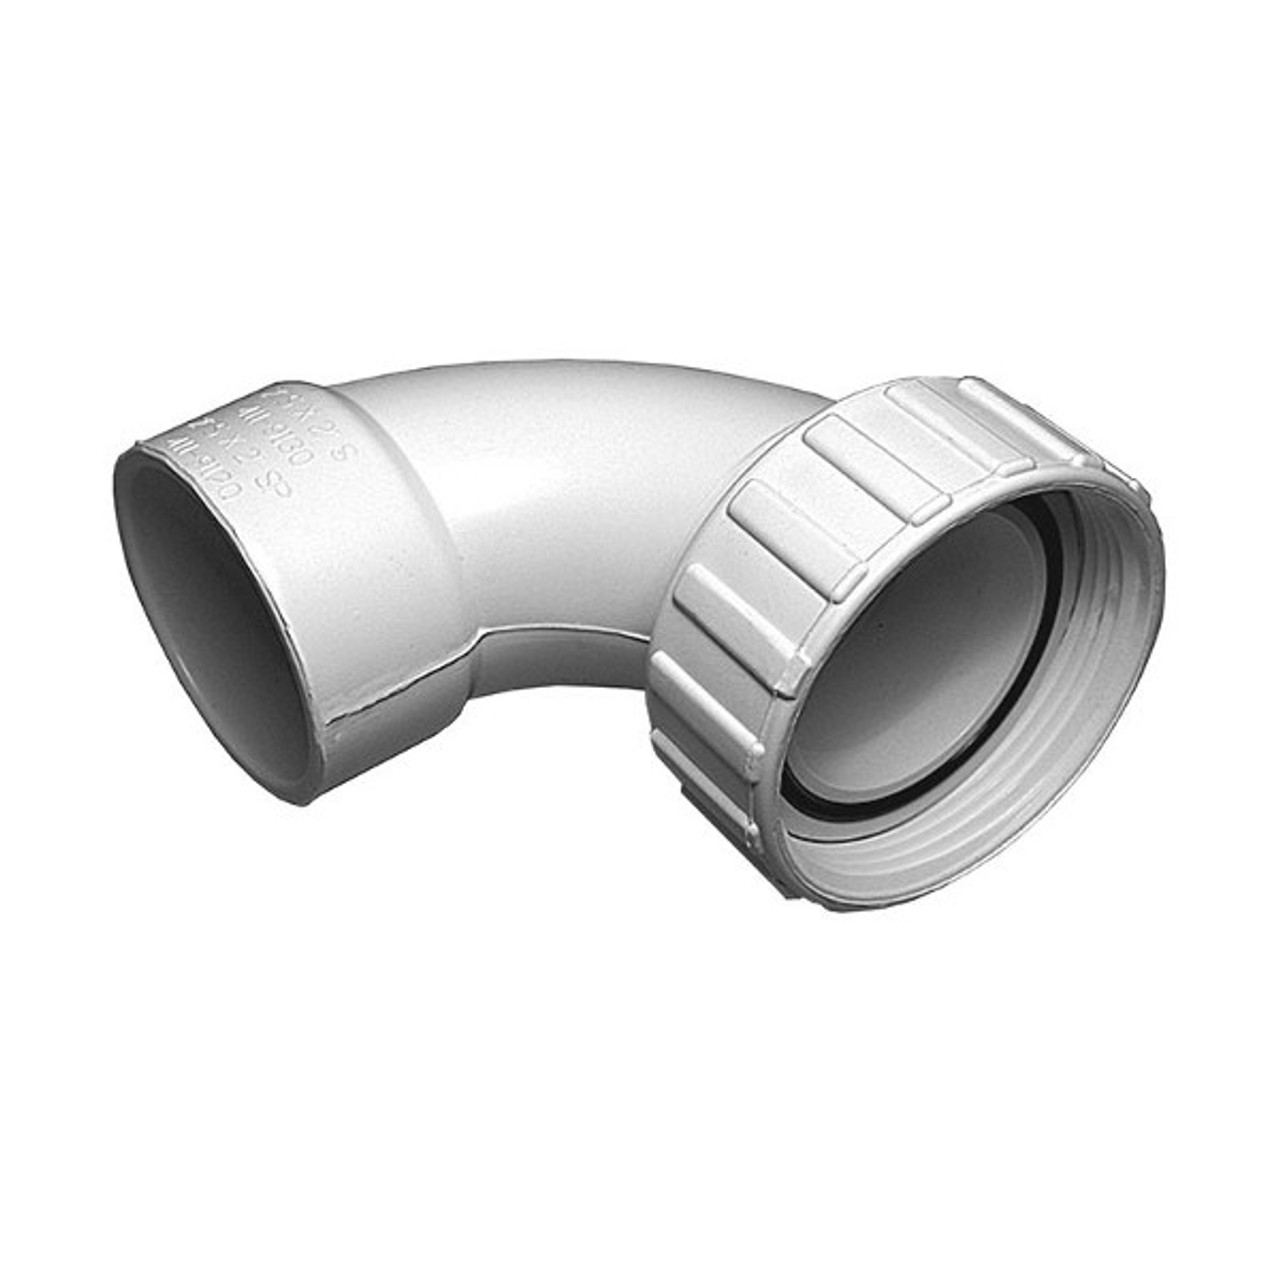 Ks lok 90 Degree Union Elbow, Stainless Steel 304, Om Tubes Tube Fitting  15mm (Pack of 3) 2-Way 90° Elbow Pipe Joint Price in India - Buy Ks lok 90  Degree Union